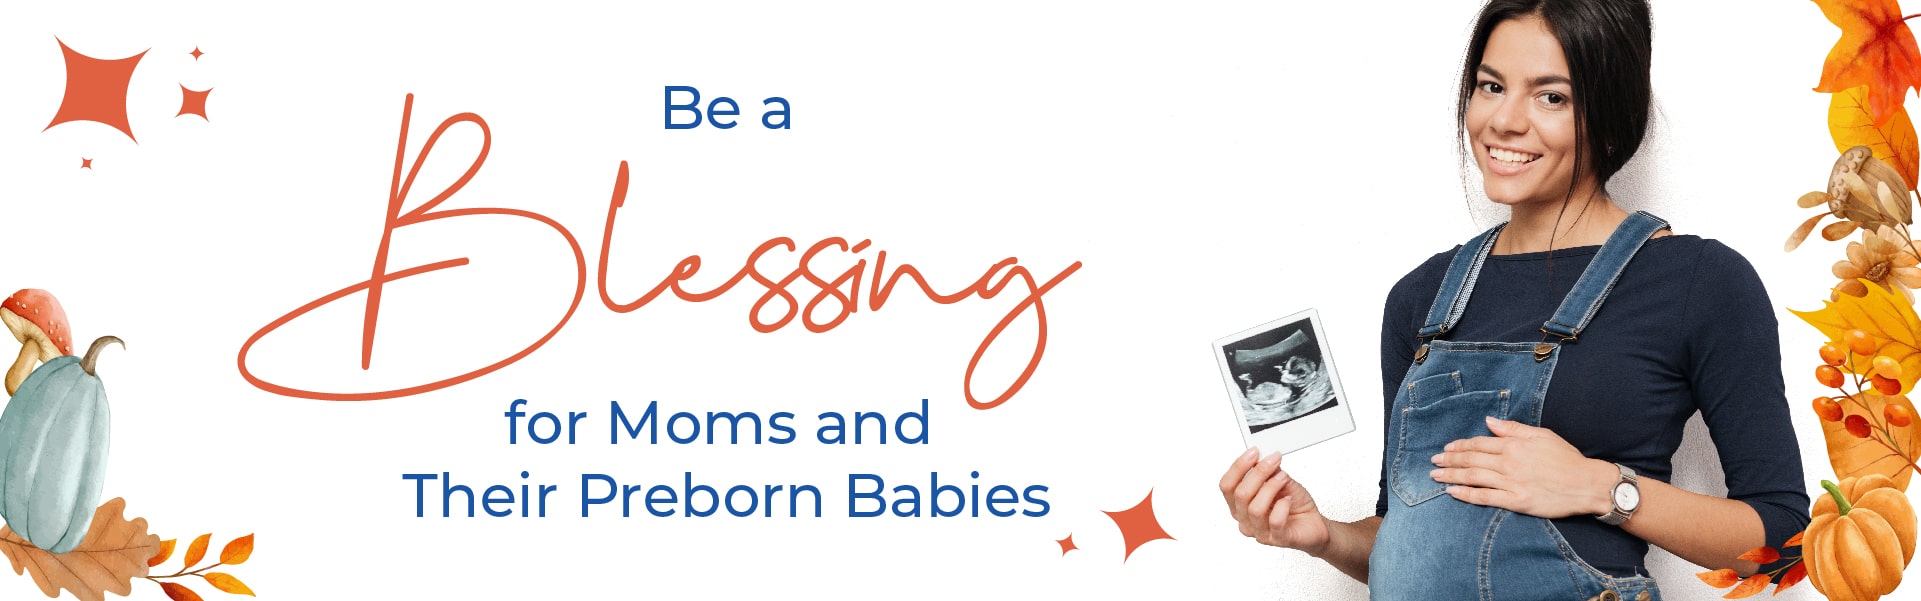 be a blessing for moms and their preborn babies woman holding ultrasound